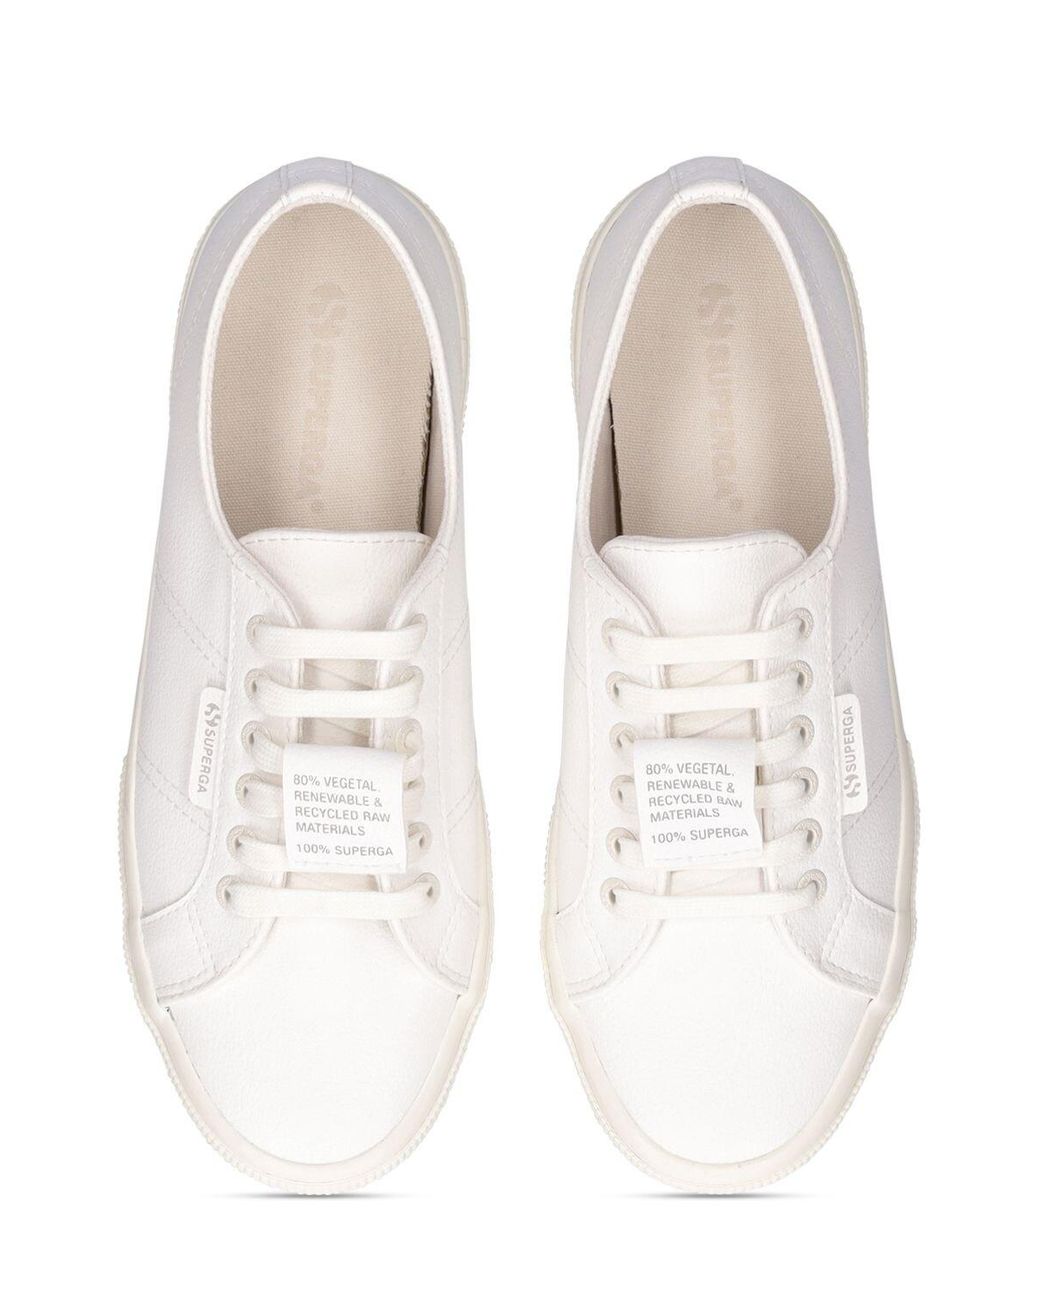 Superga Grape-based Faux Leather Low Top Sneaker in White | Lyst Australia